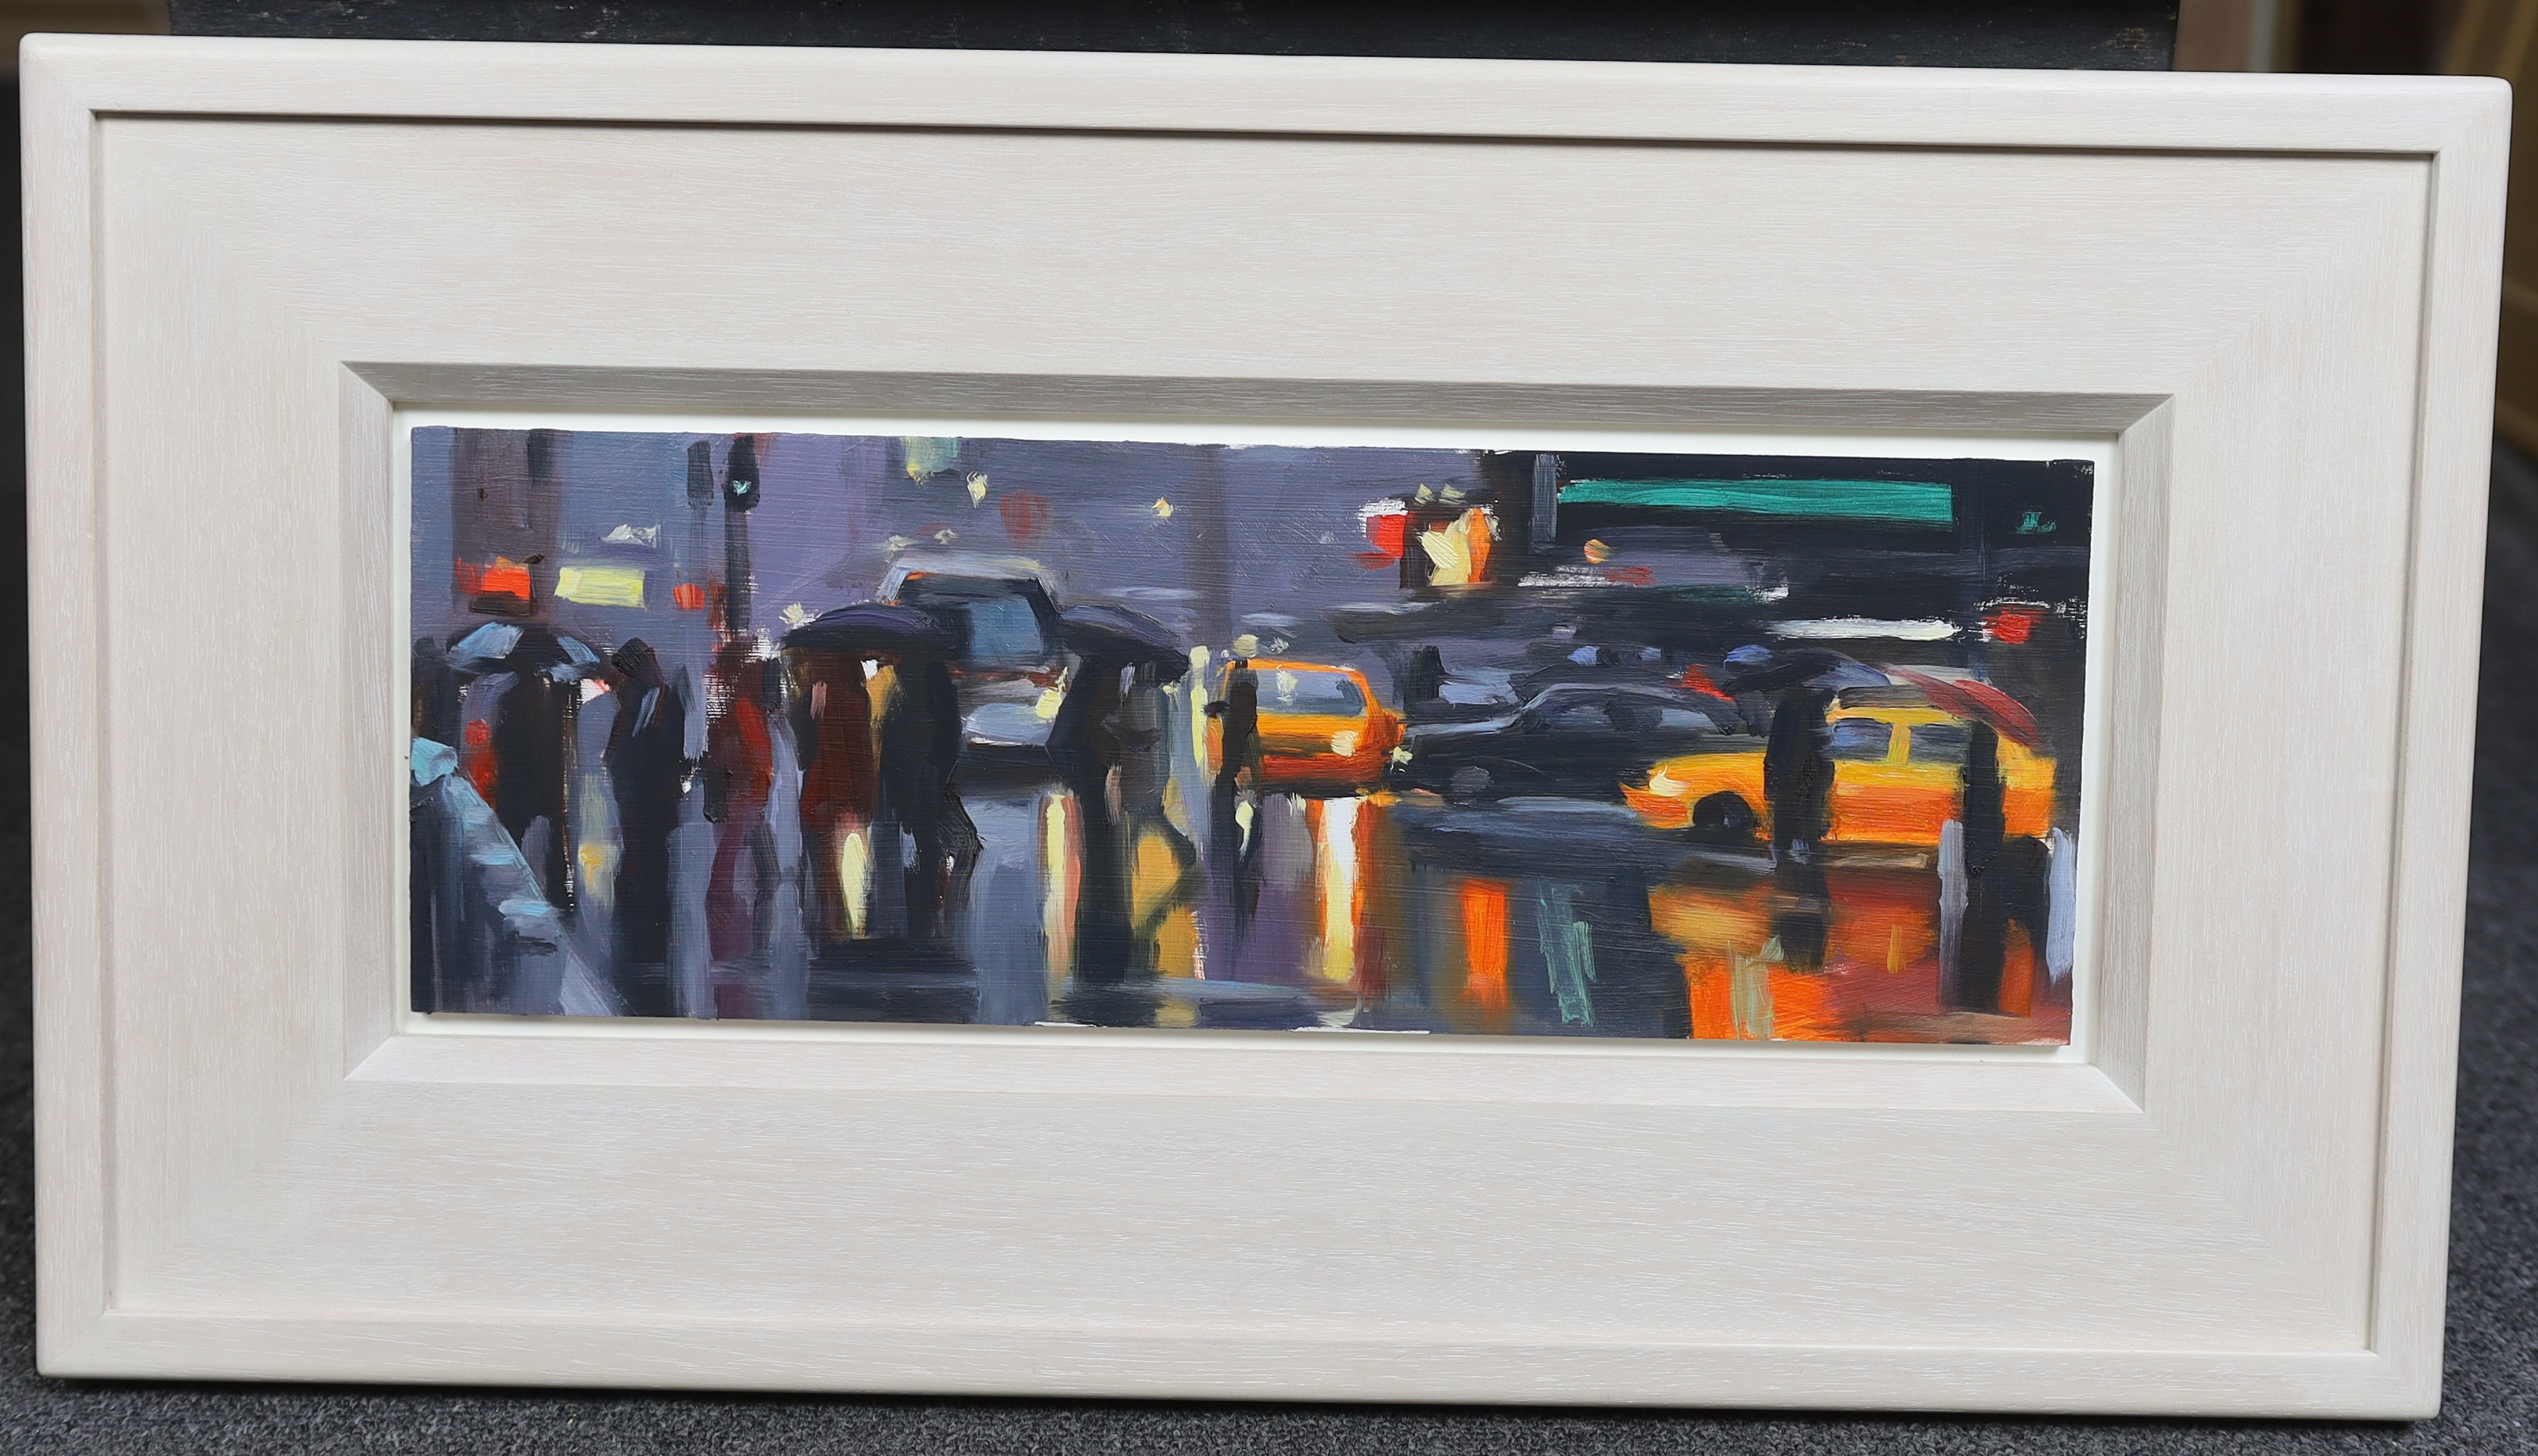 Liam Spencer (British, b.1964), 'New York Taxis', oil on panel, 15 x 43cm